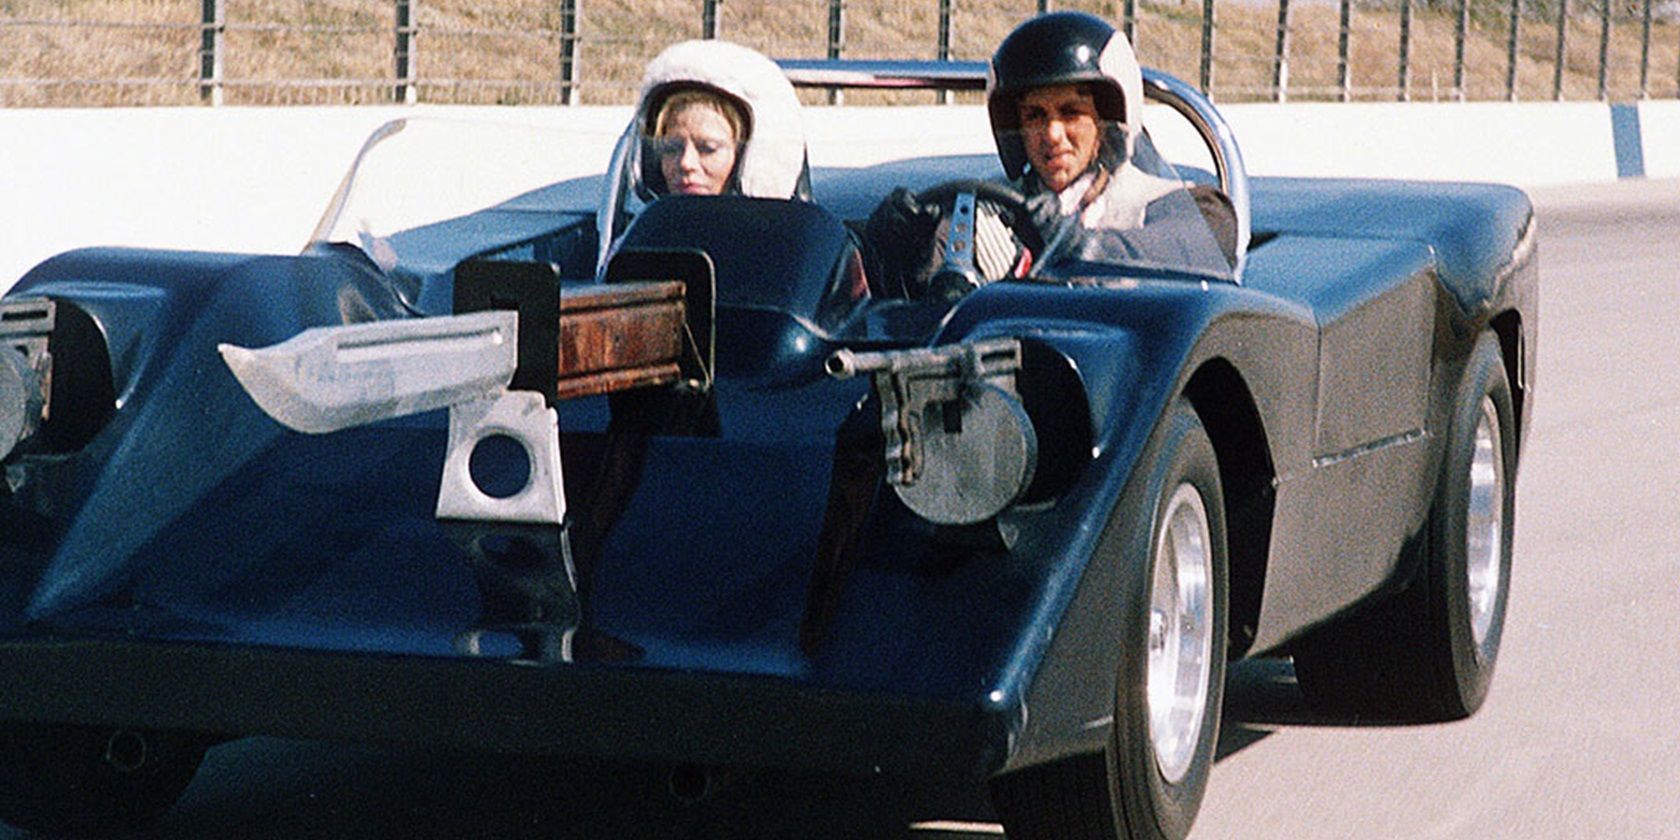 Sylvester Stallone driving a car in Death Race 2000